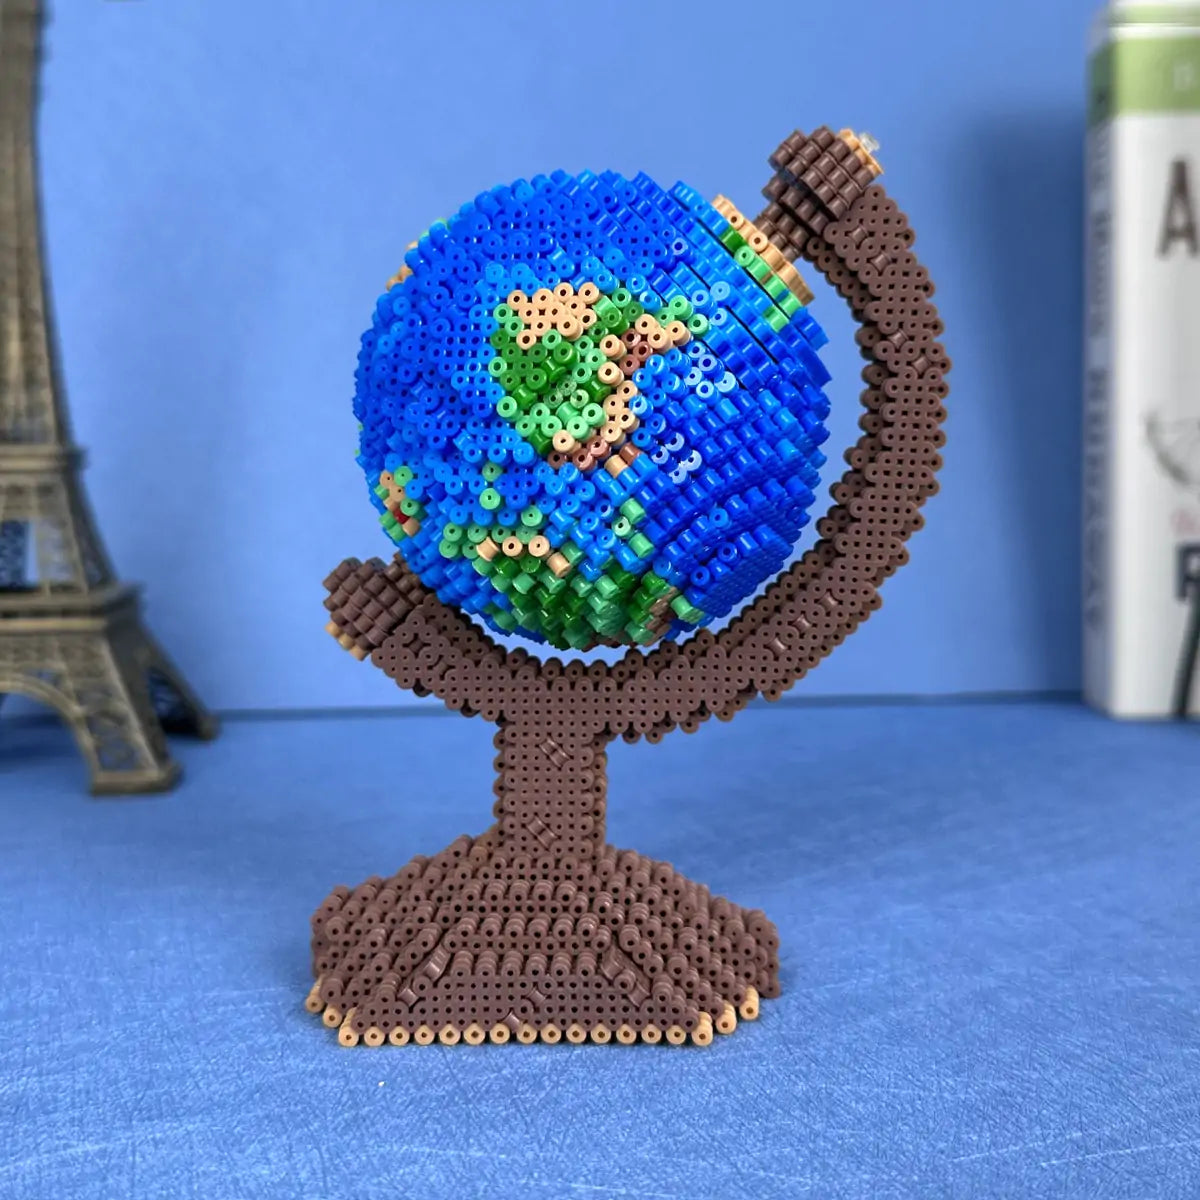 Artkal Fuse Beads 3D Globe Combo with Beads, Pattern and Tools